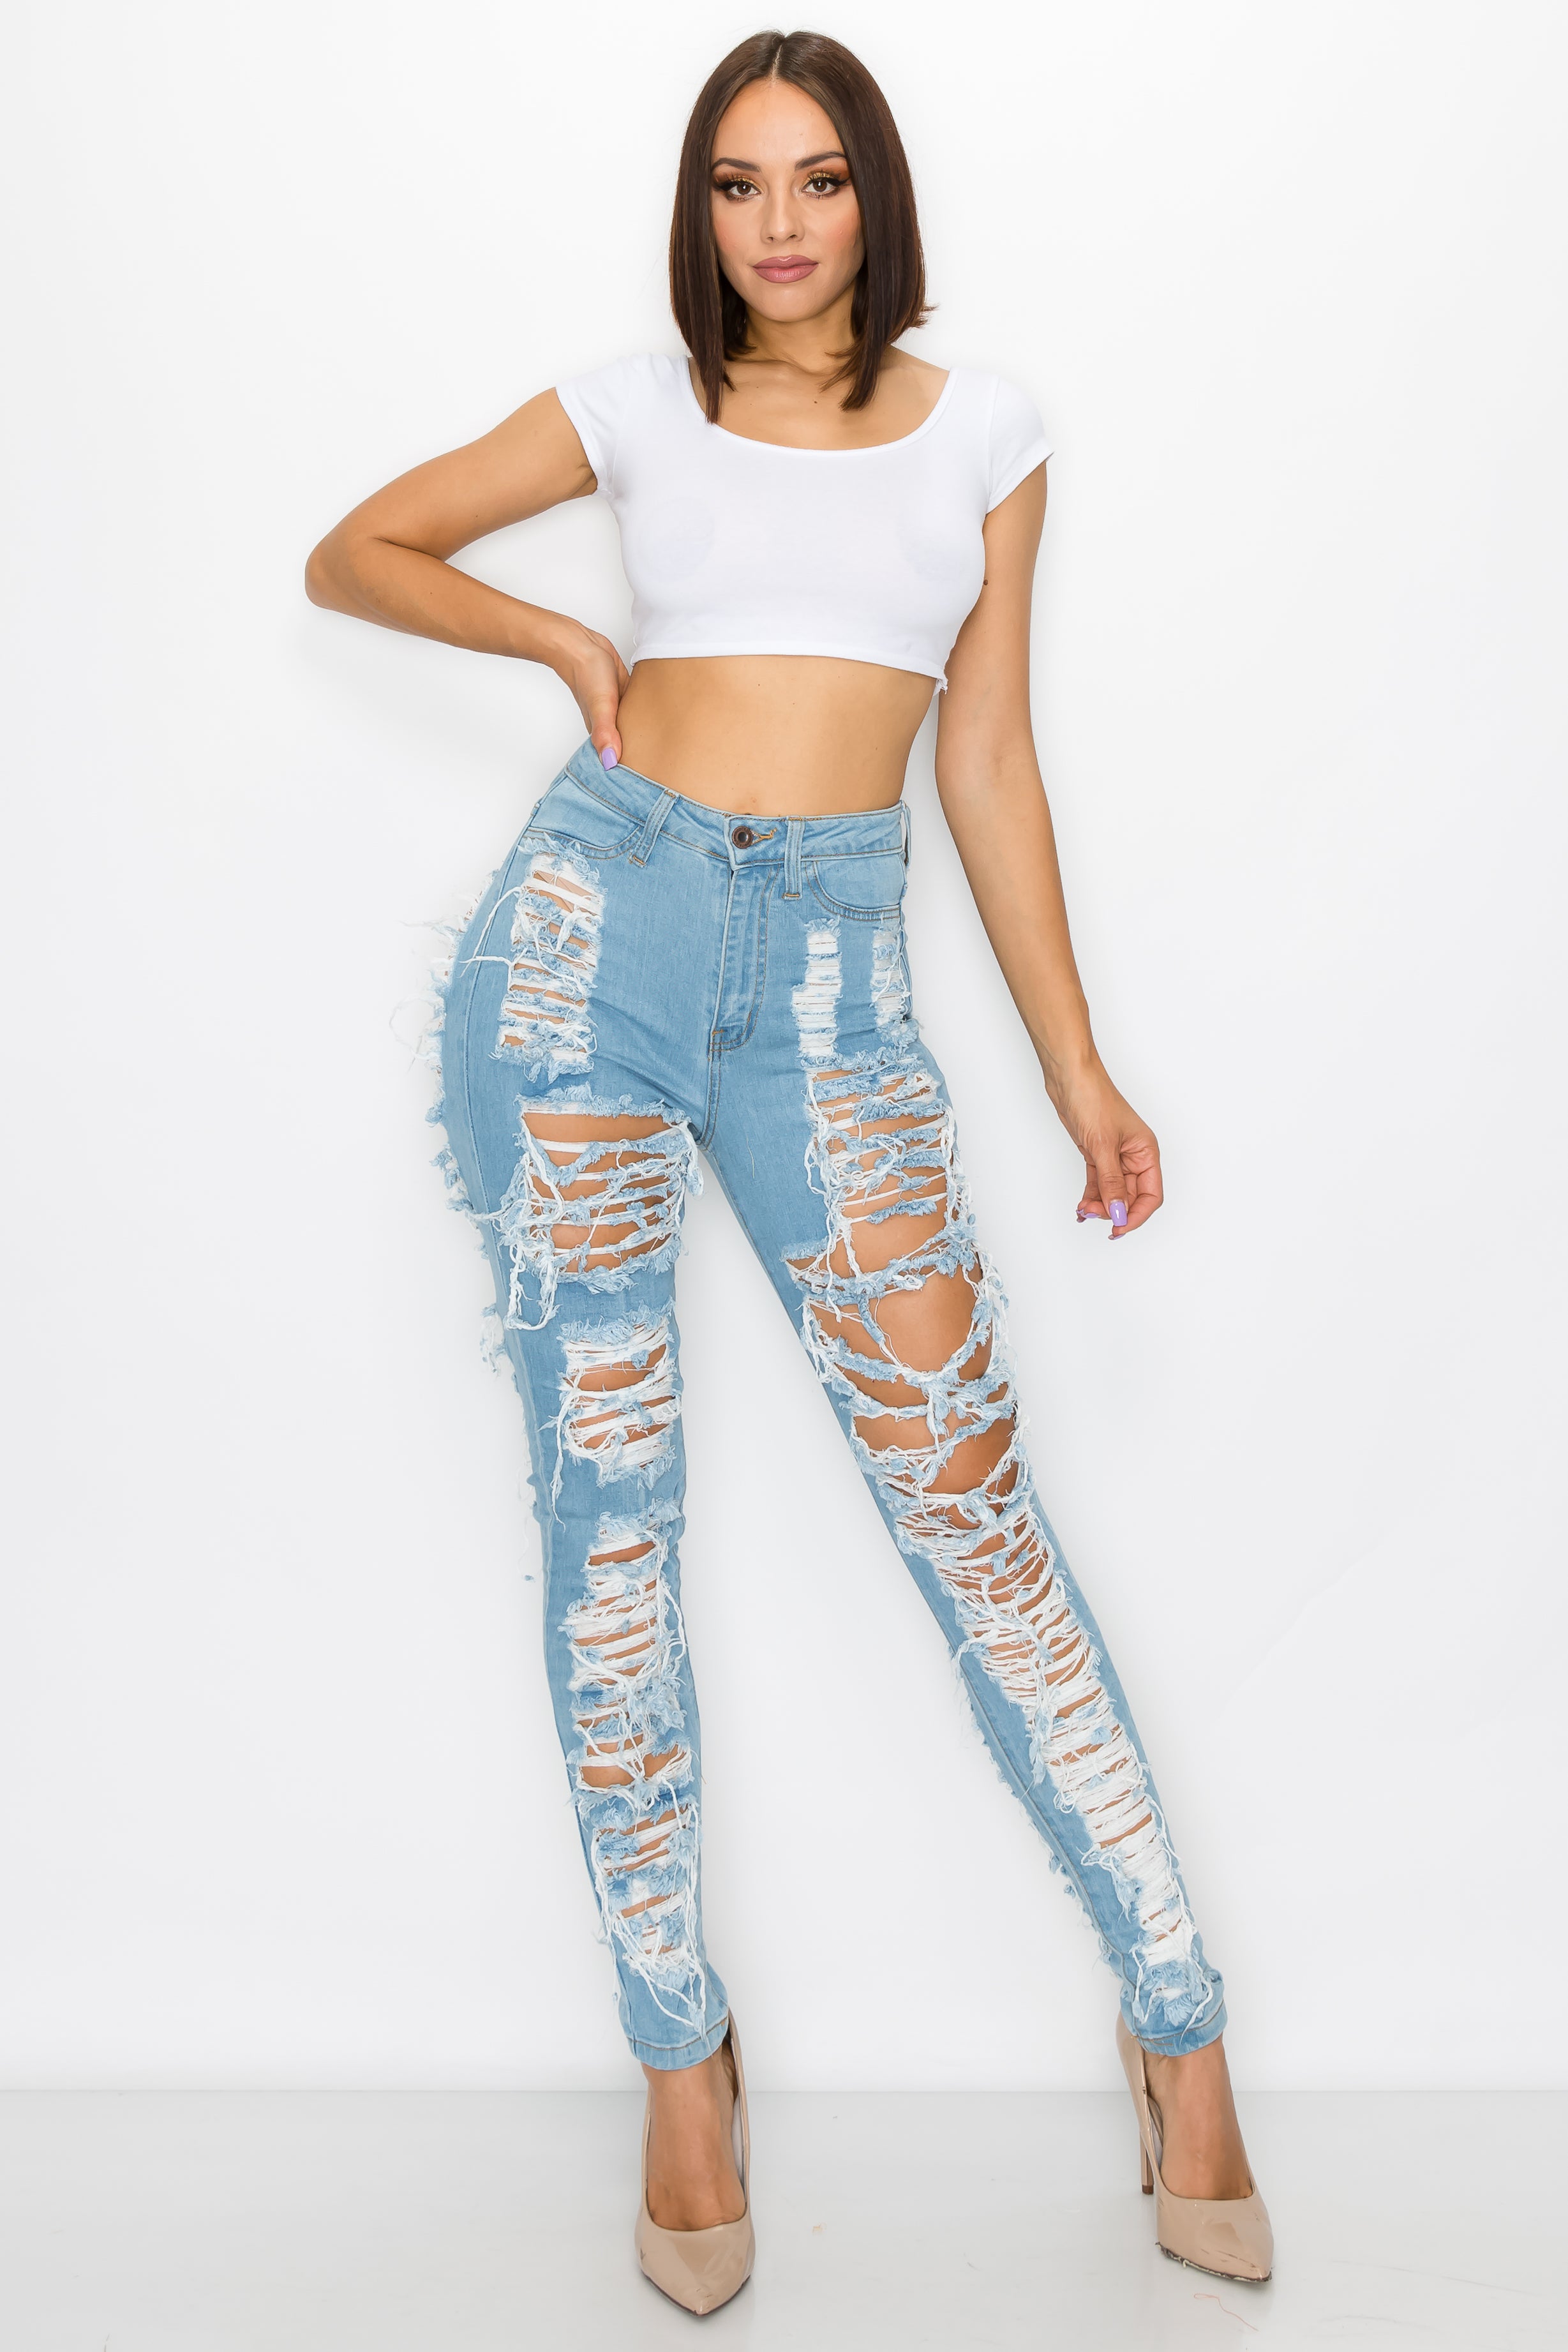 40090 Women Super High Waisted Distressed Skinny Jeans with Cut Outs